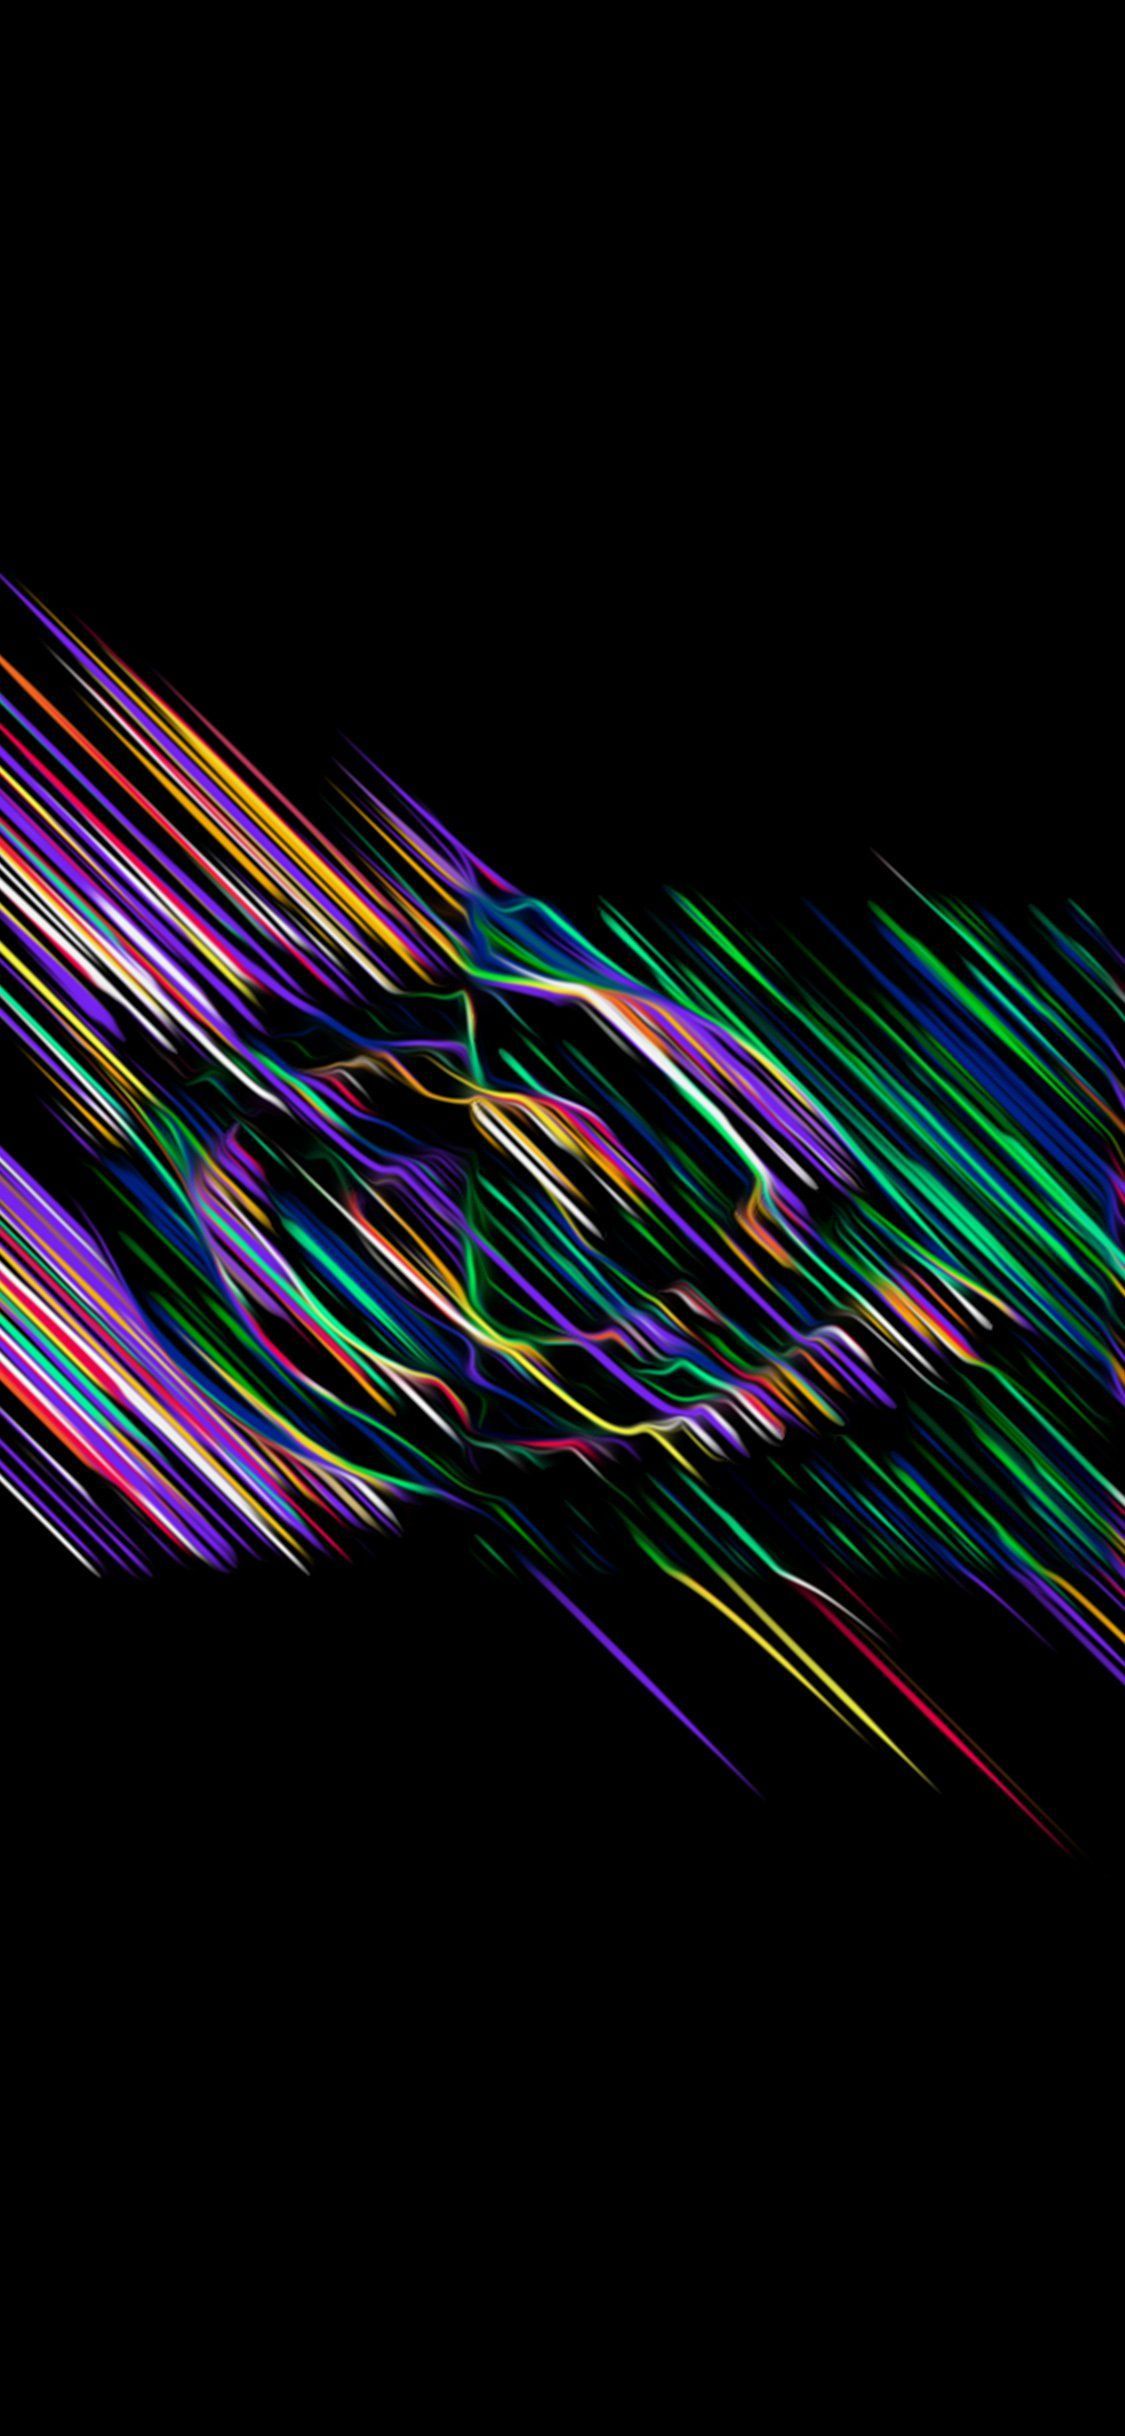 Rainbow line dark color pattern background iPhone X Wallpaper Free Download